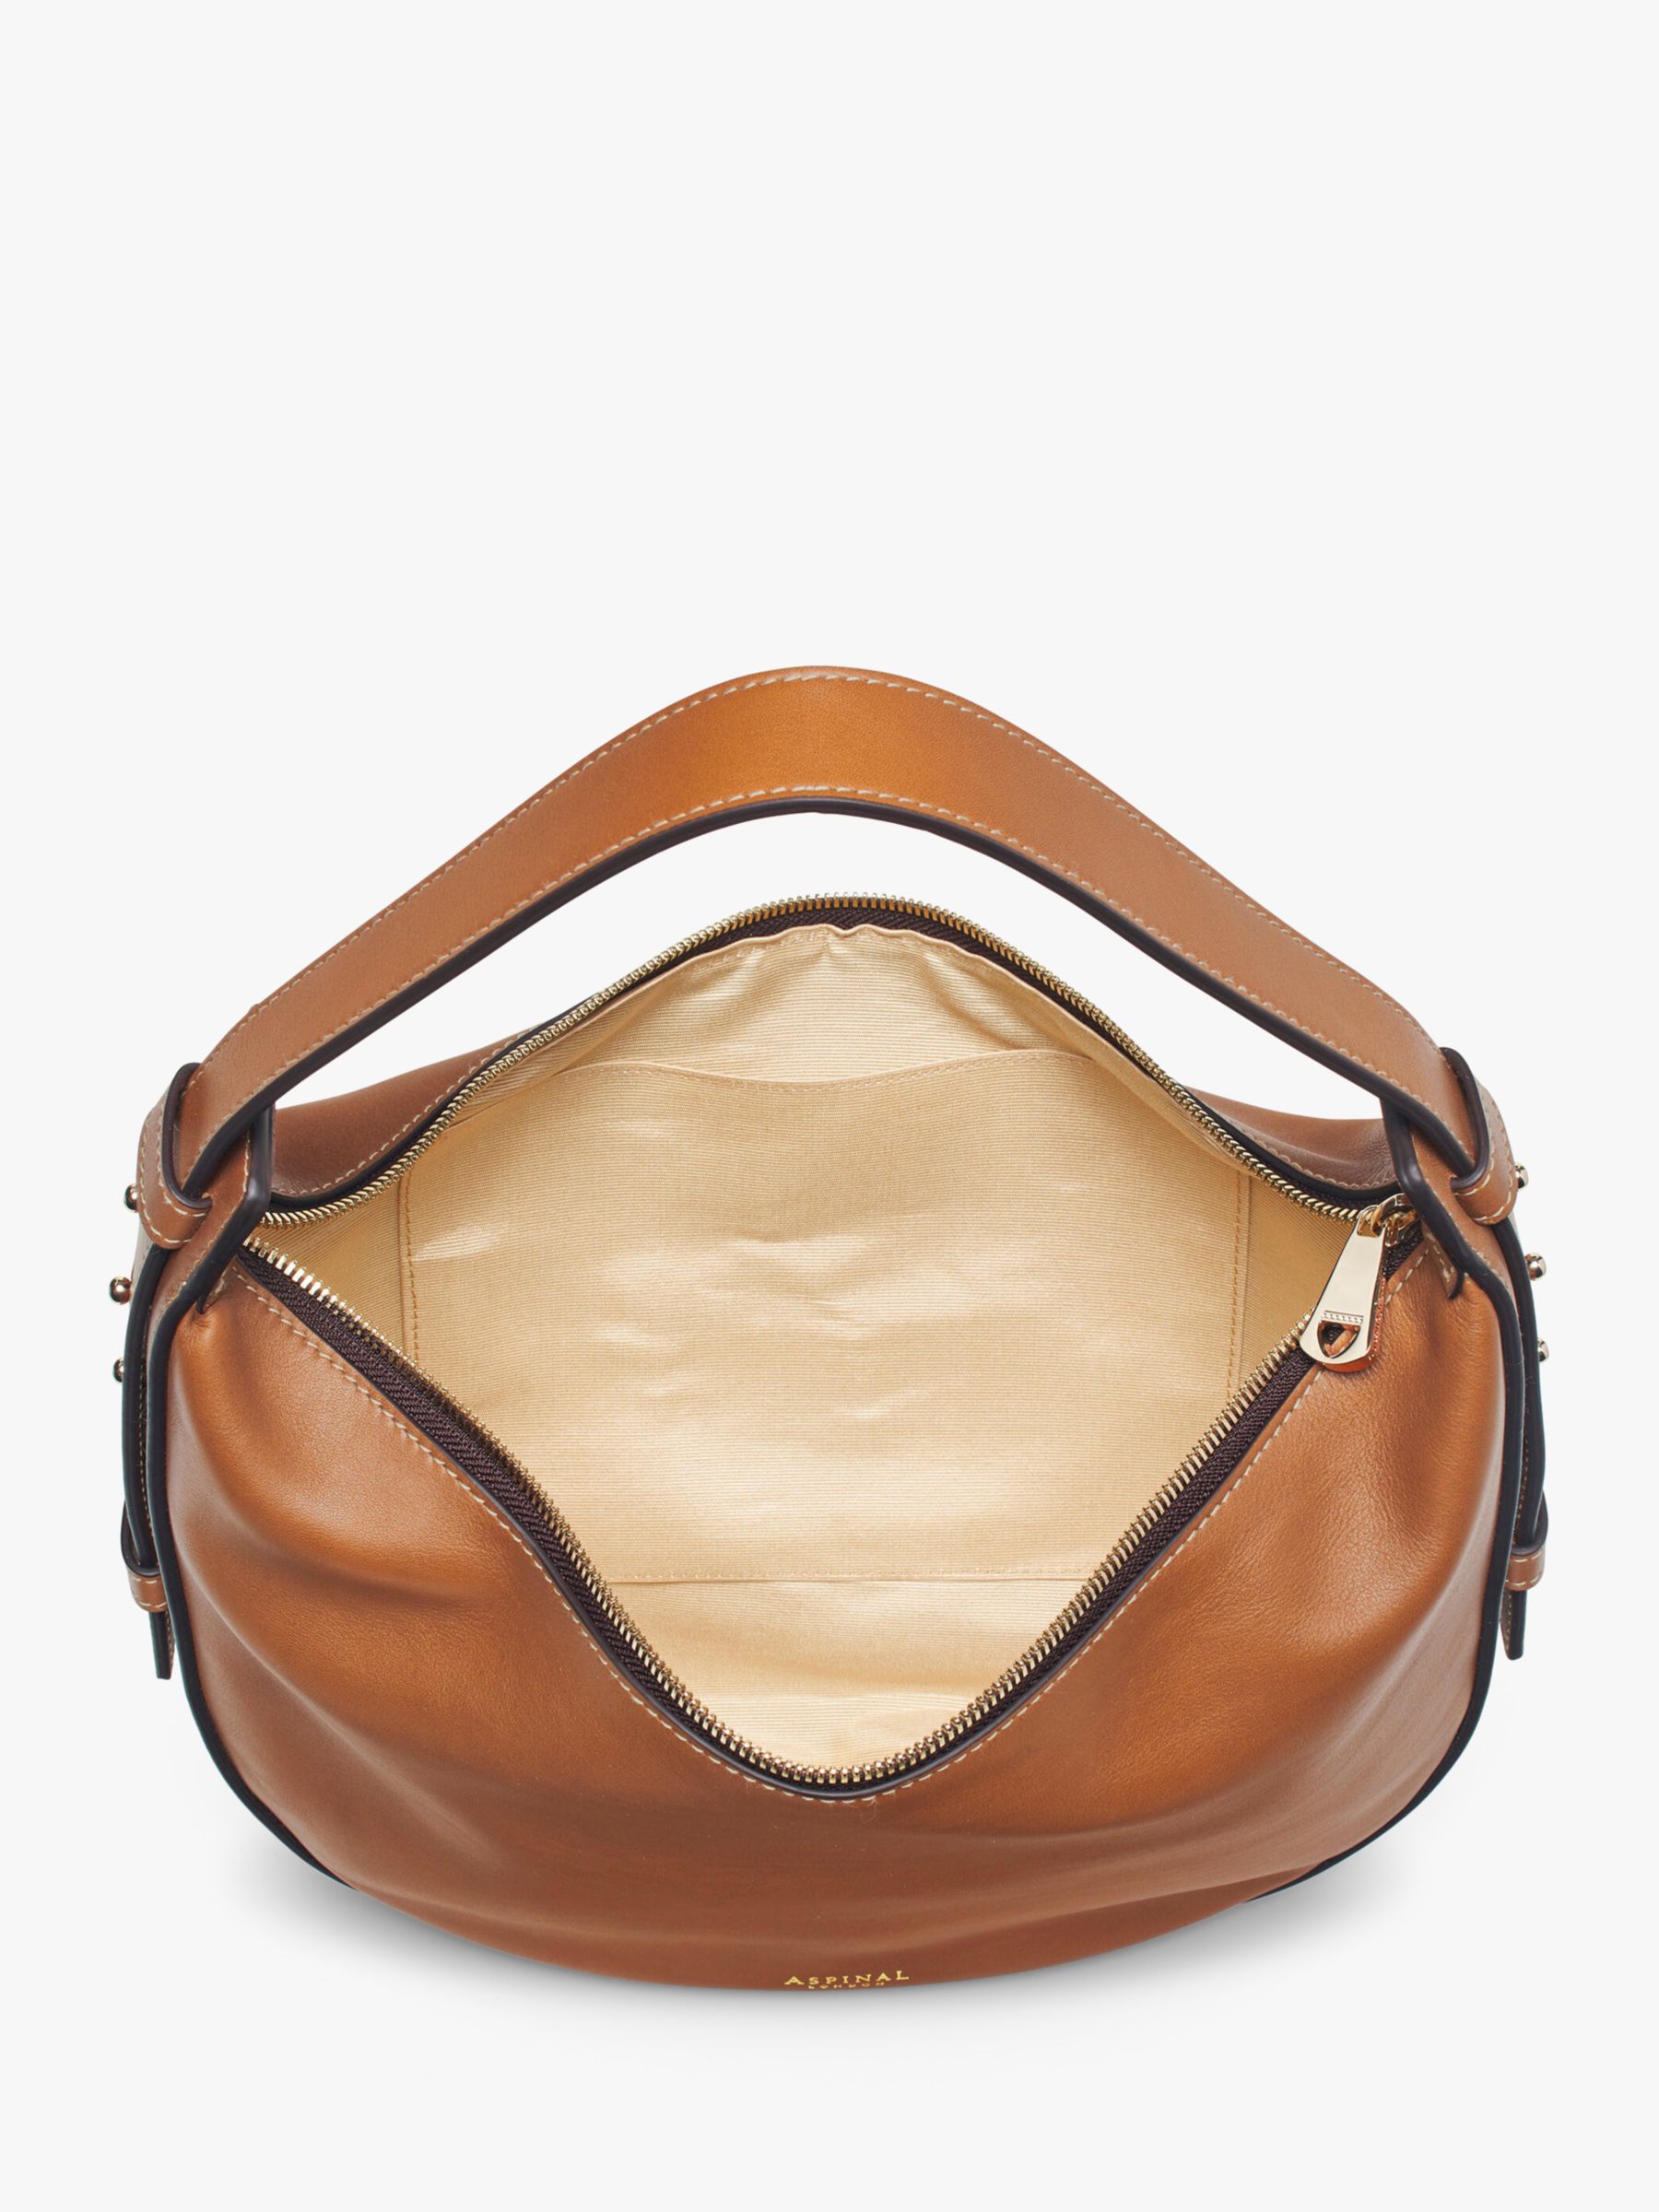 Buy Aspinal of London Crescent Smooth Leather Hobo Bag, Tan Online at johnlewis.com